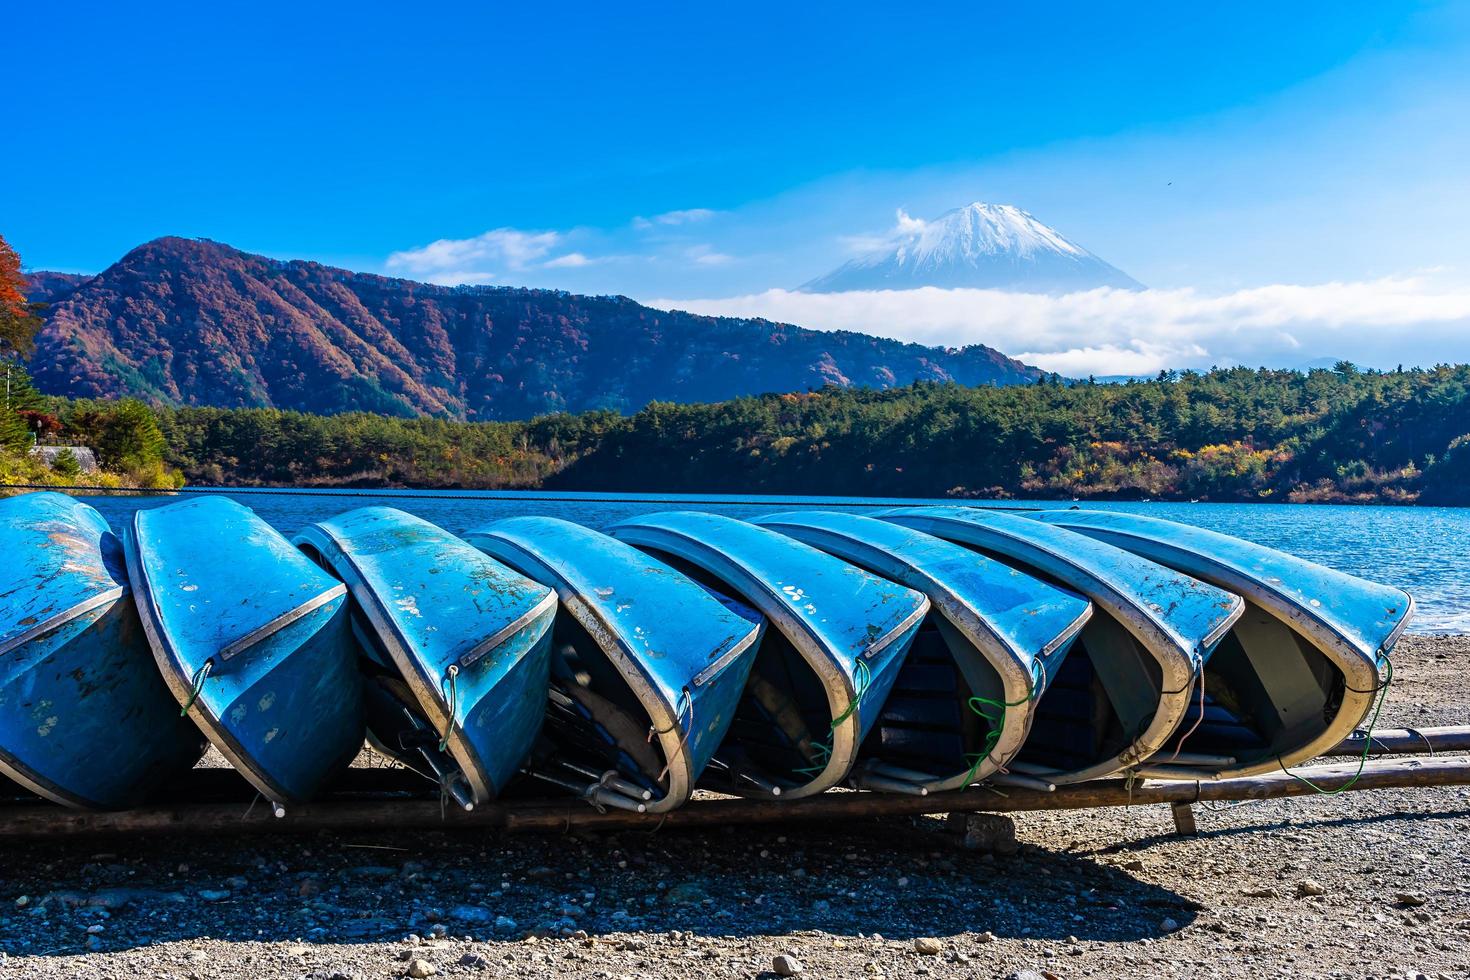 Boats and Mt. Fuji in Japan in autumn photo